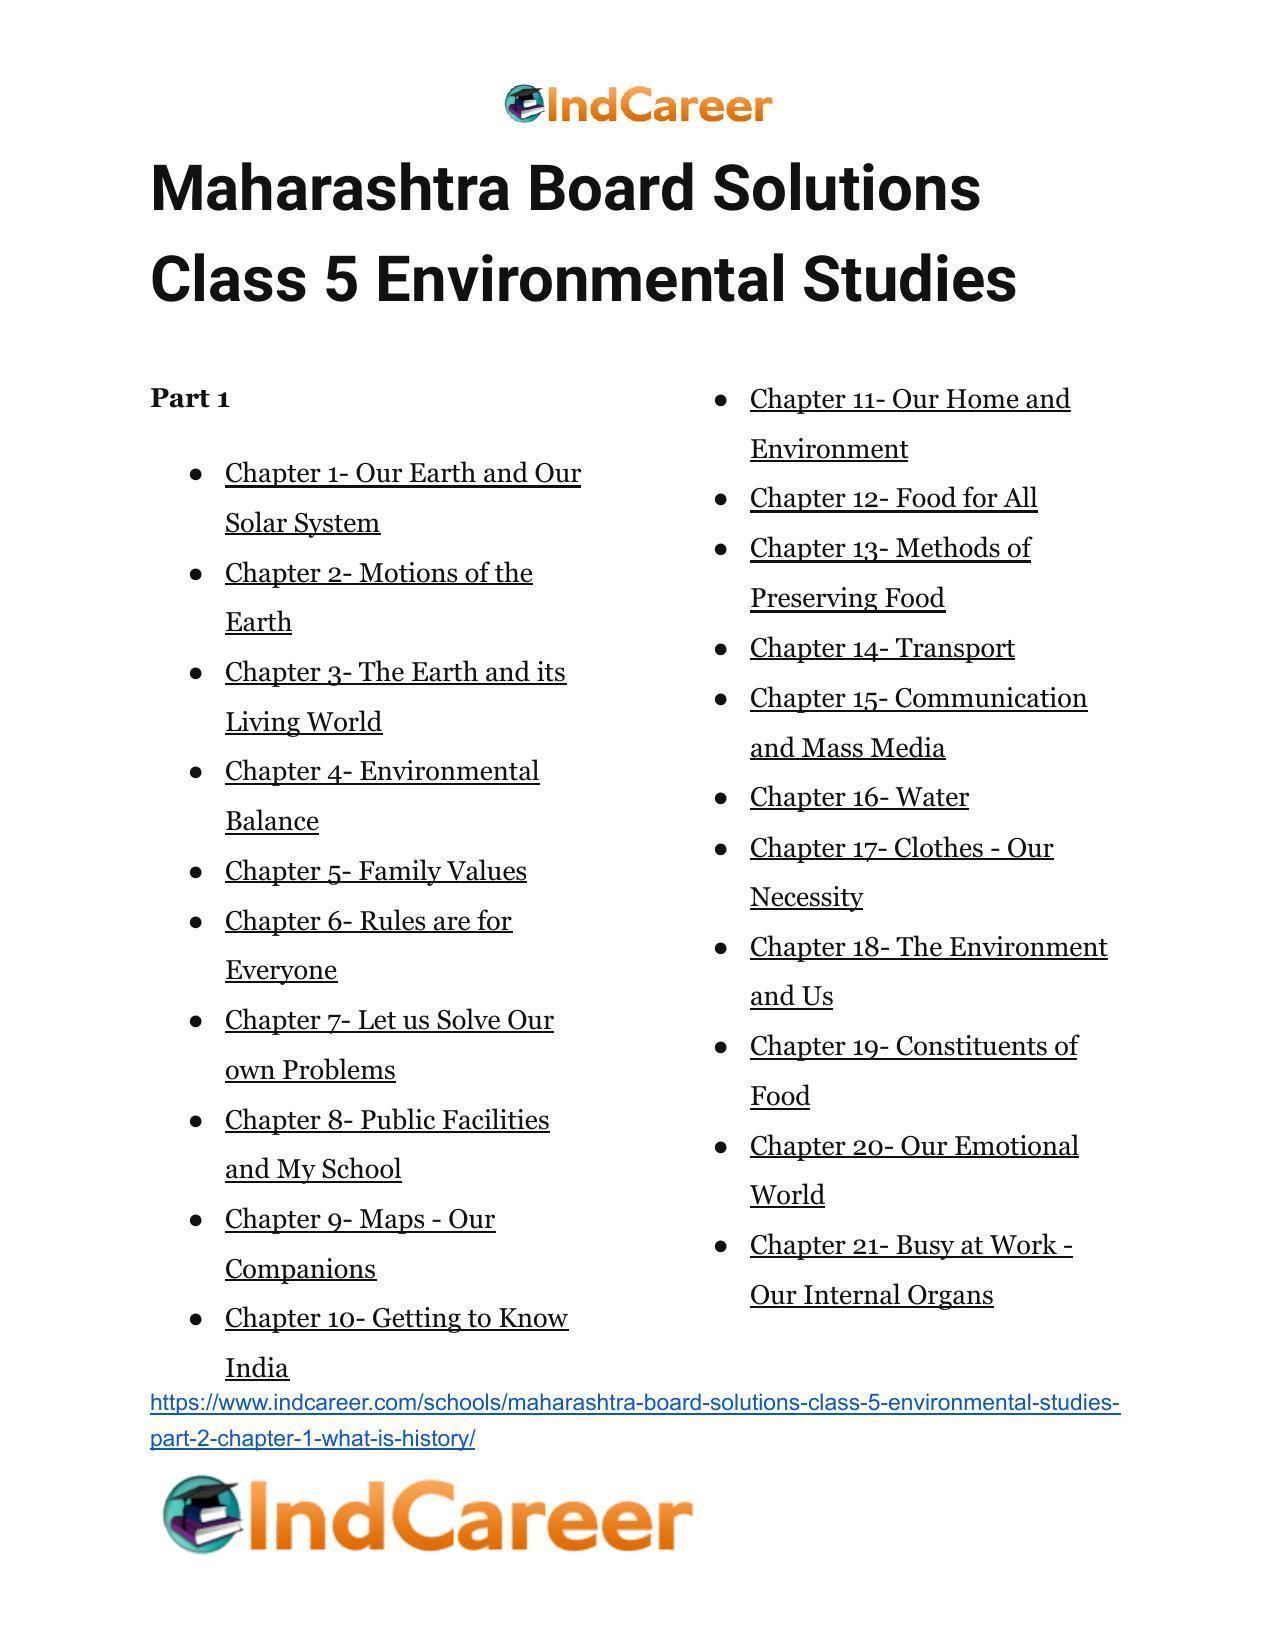 Maharashtra Board Solutions Class 5-Environmental Studies (Part 2): Chapter 1- What is History? - Page 17